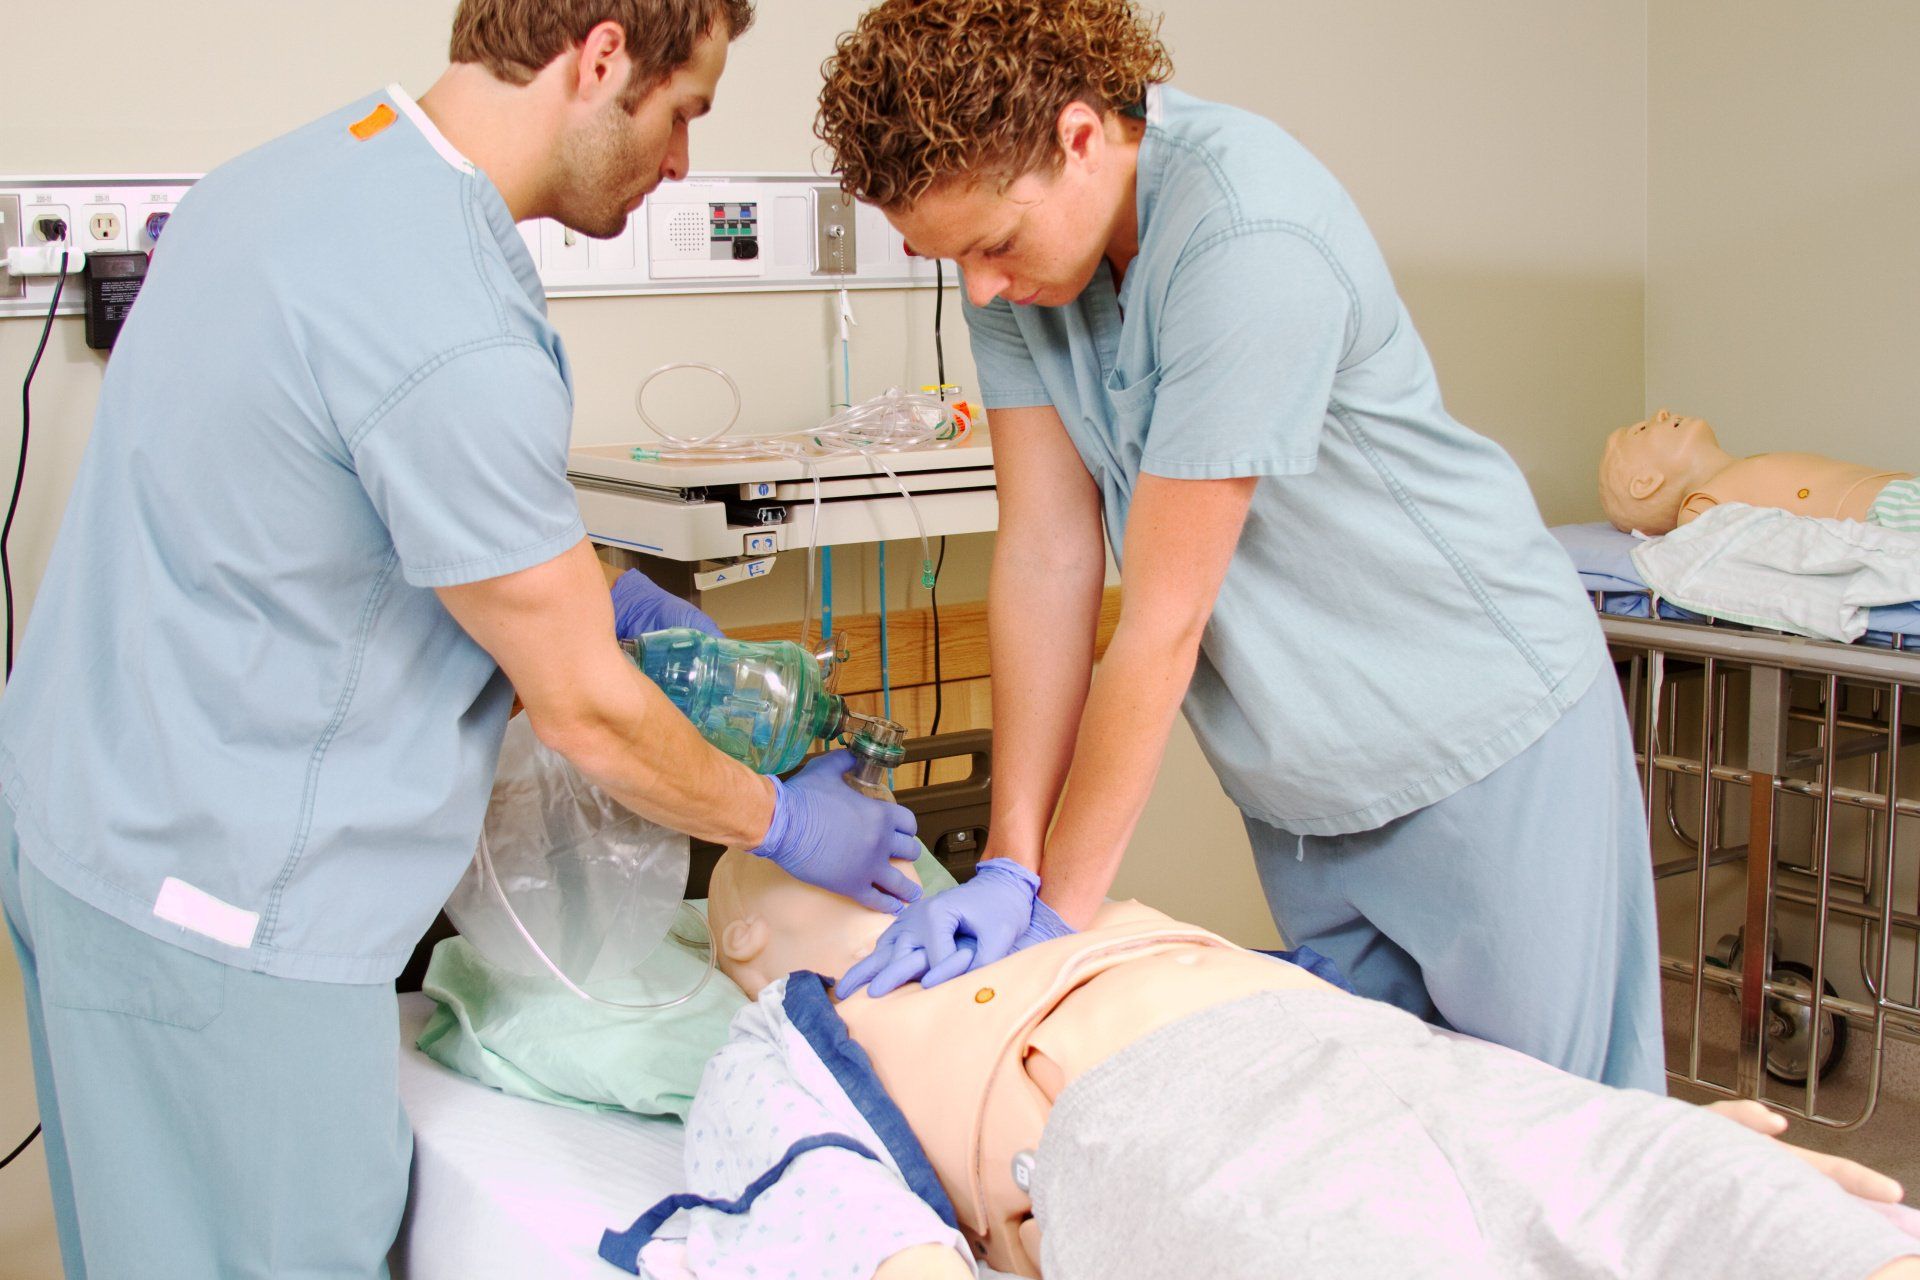 two nurses are practicing on a mannequin in a hospital room